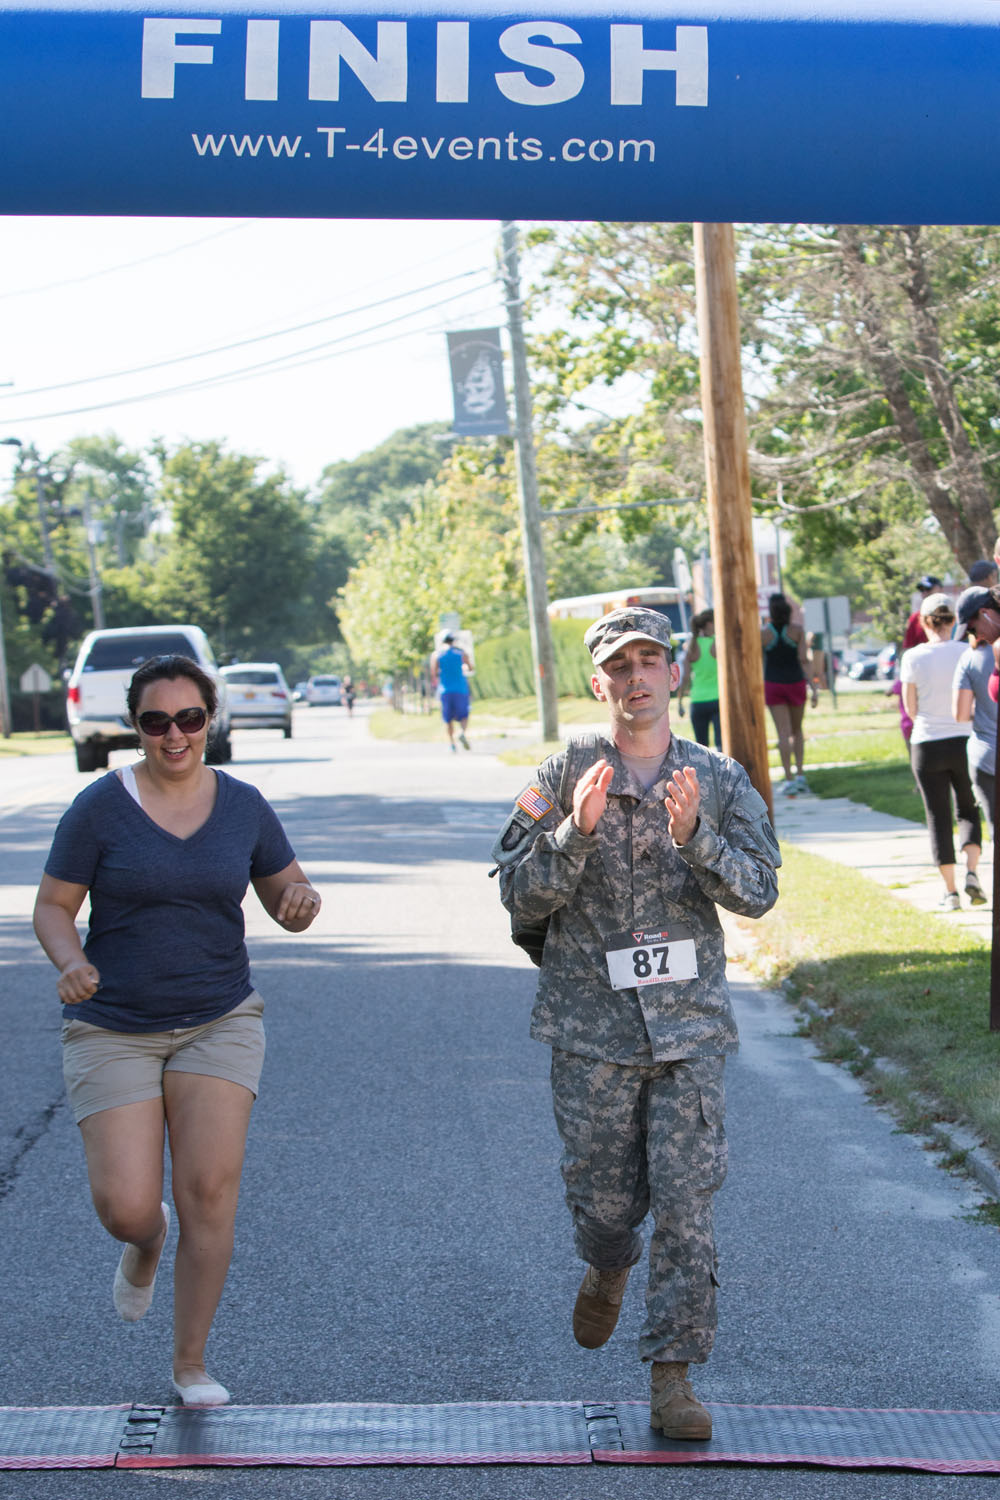 Organizer and U.S. Army veteran Josh Whaley crosses the finish line with his  fiancee, Alicia Idunate. He ran with a backpack filled with 40 pounds of weights.